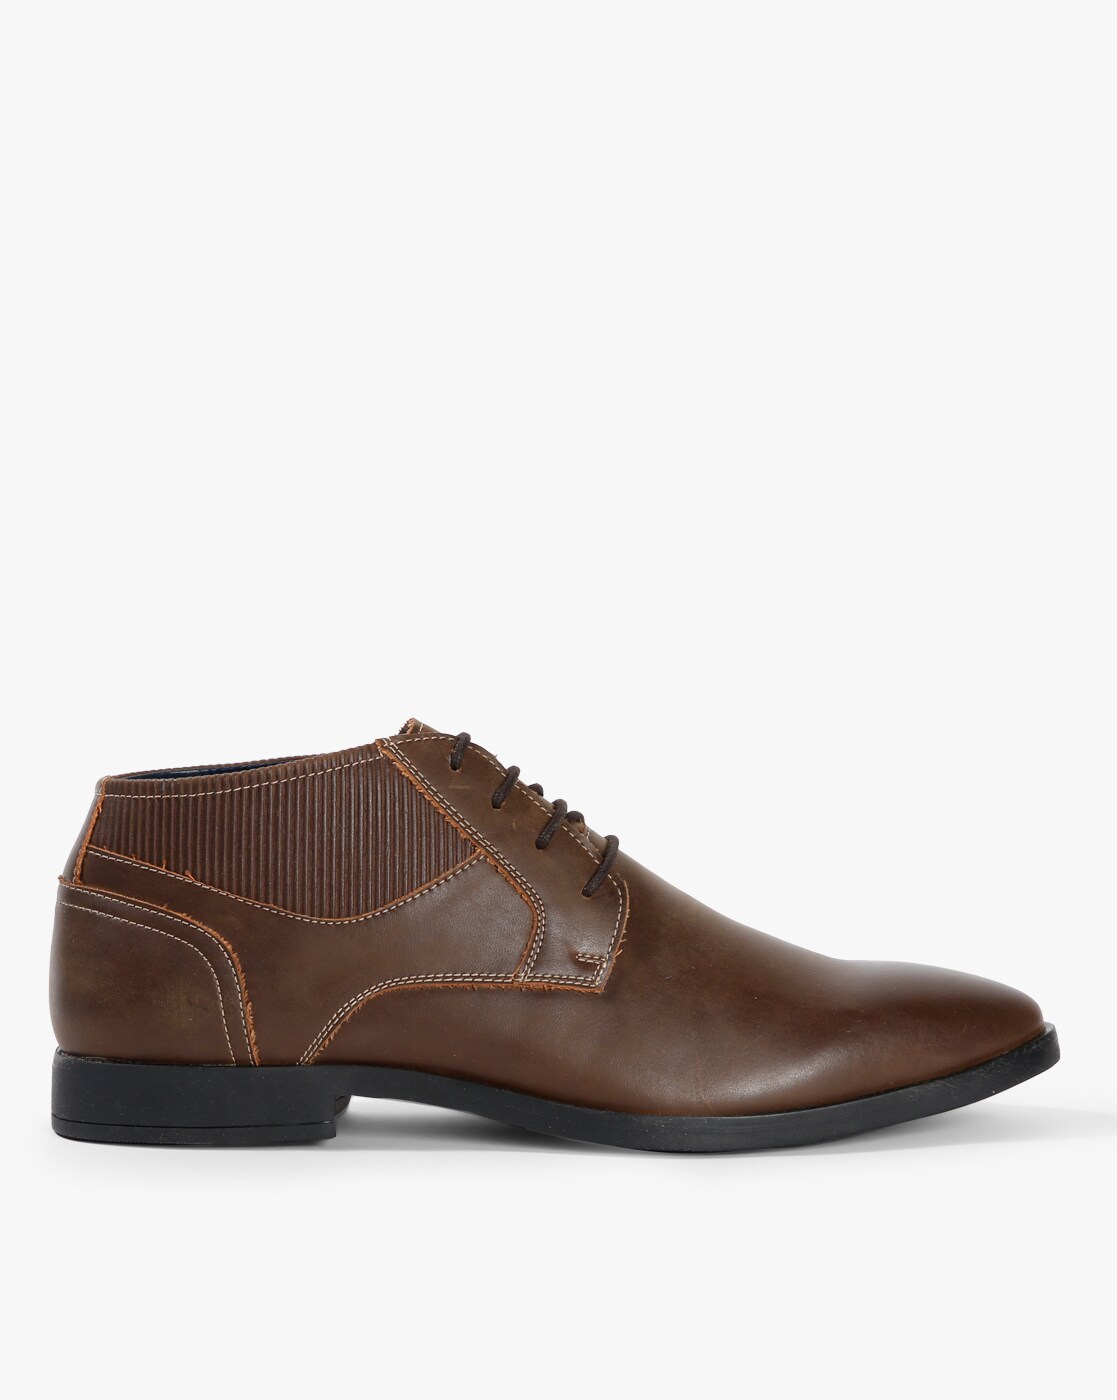 formal shoes online shopping